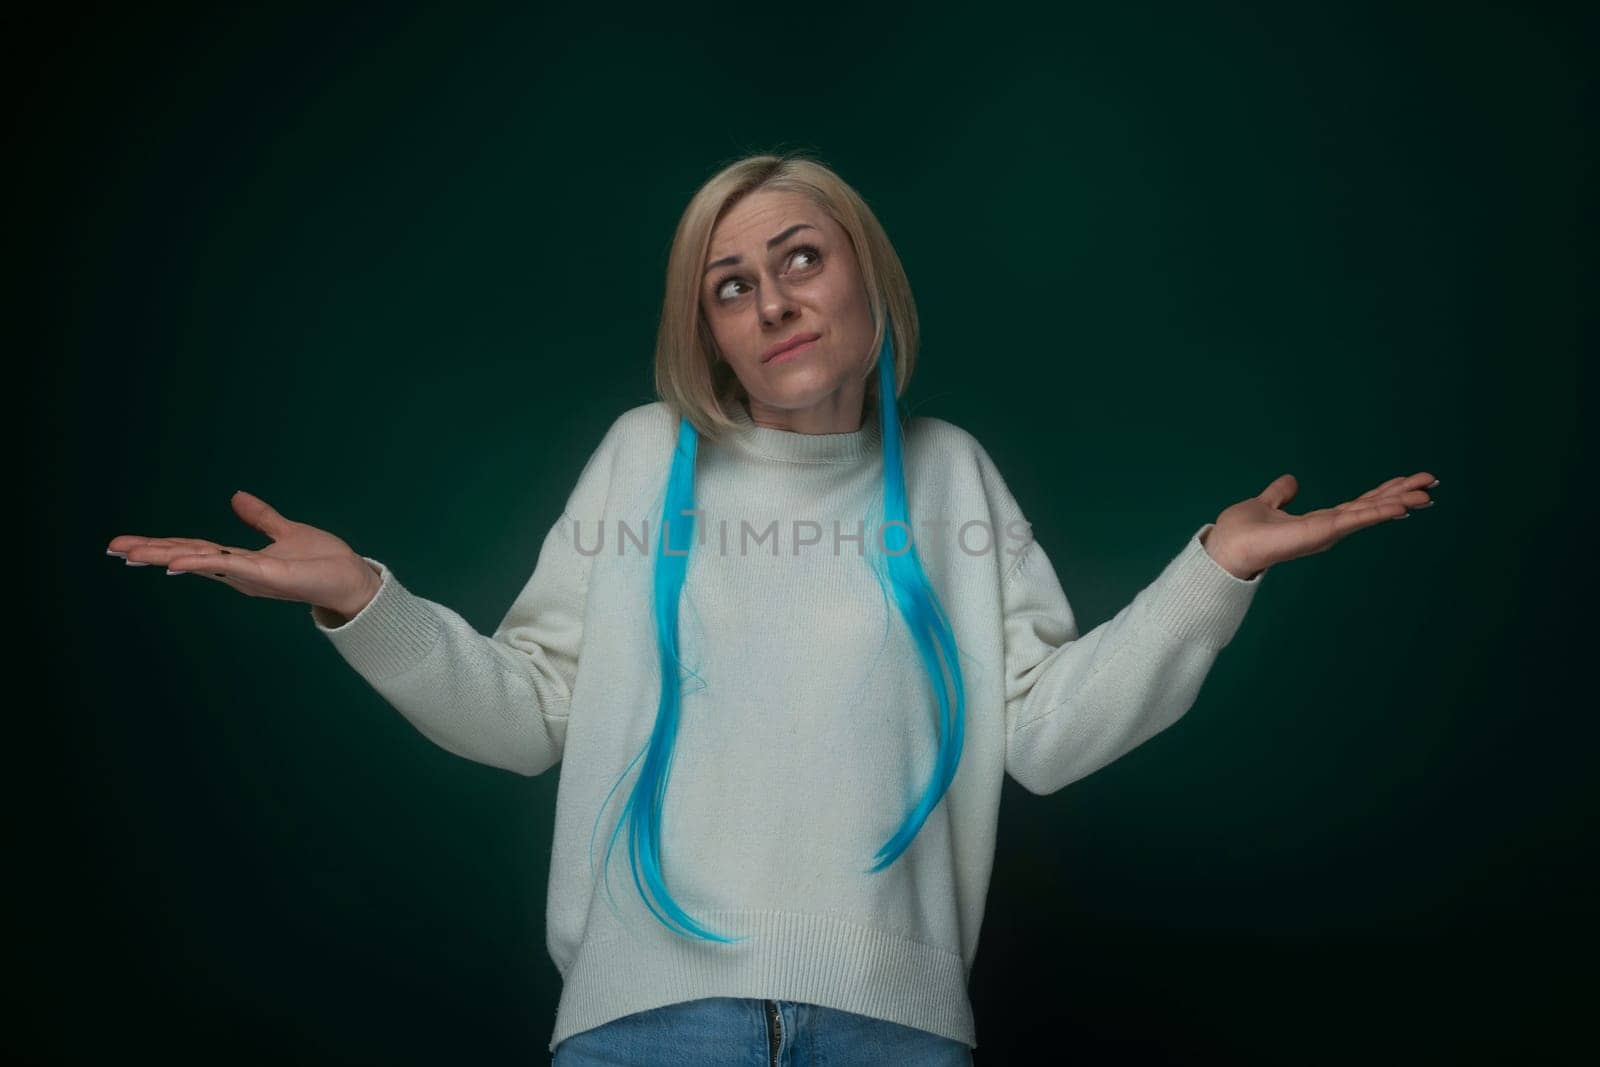 A woman with striking blue hair poses wearing a cozy white sweater. Her vibrant hair contrasts beautifully with the neutral tones of her outfit, creating a visually engaging look.